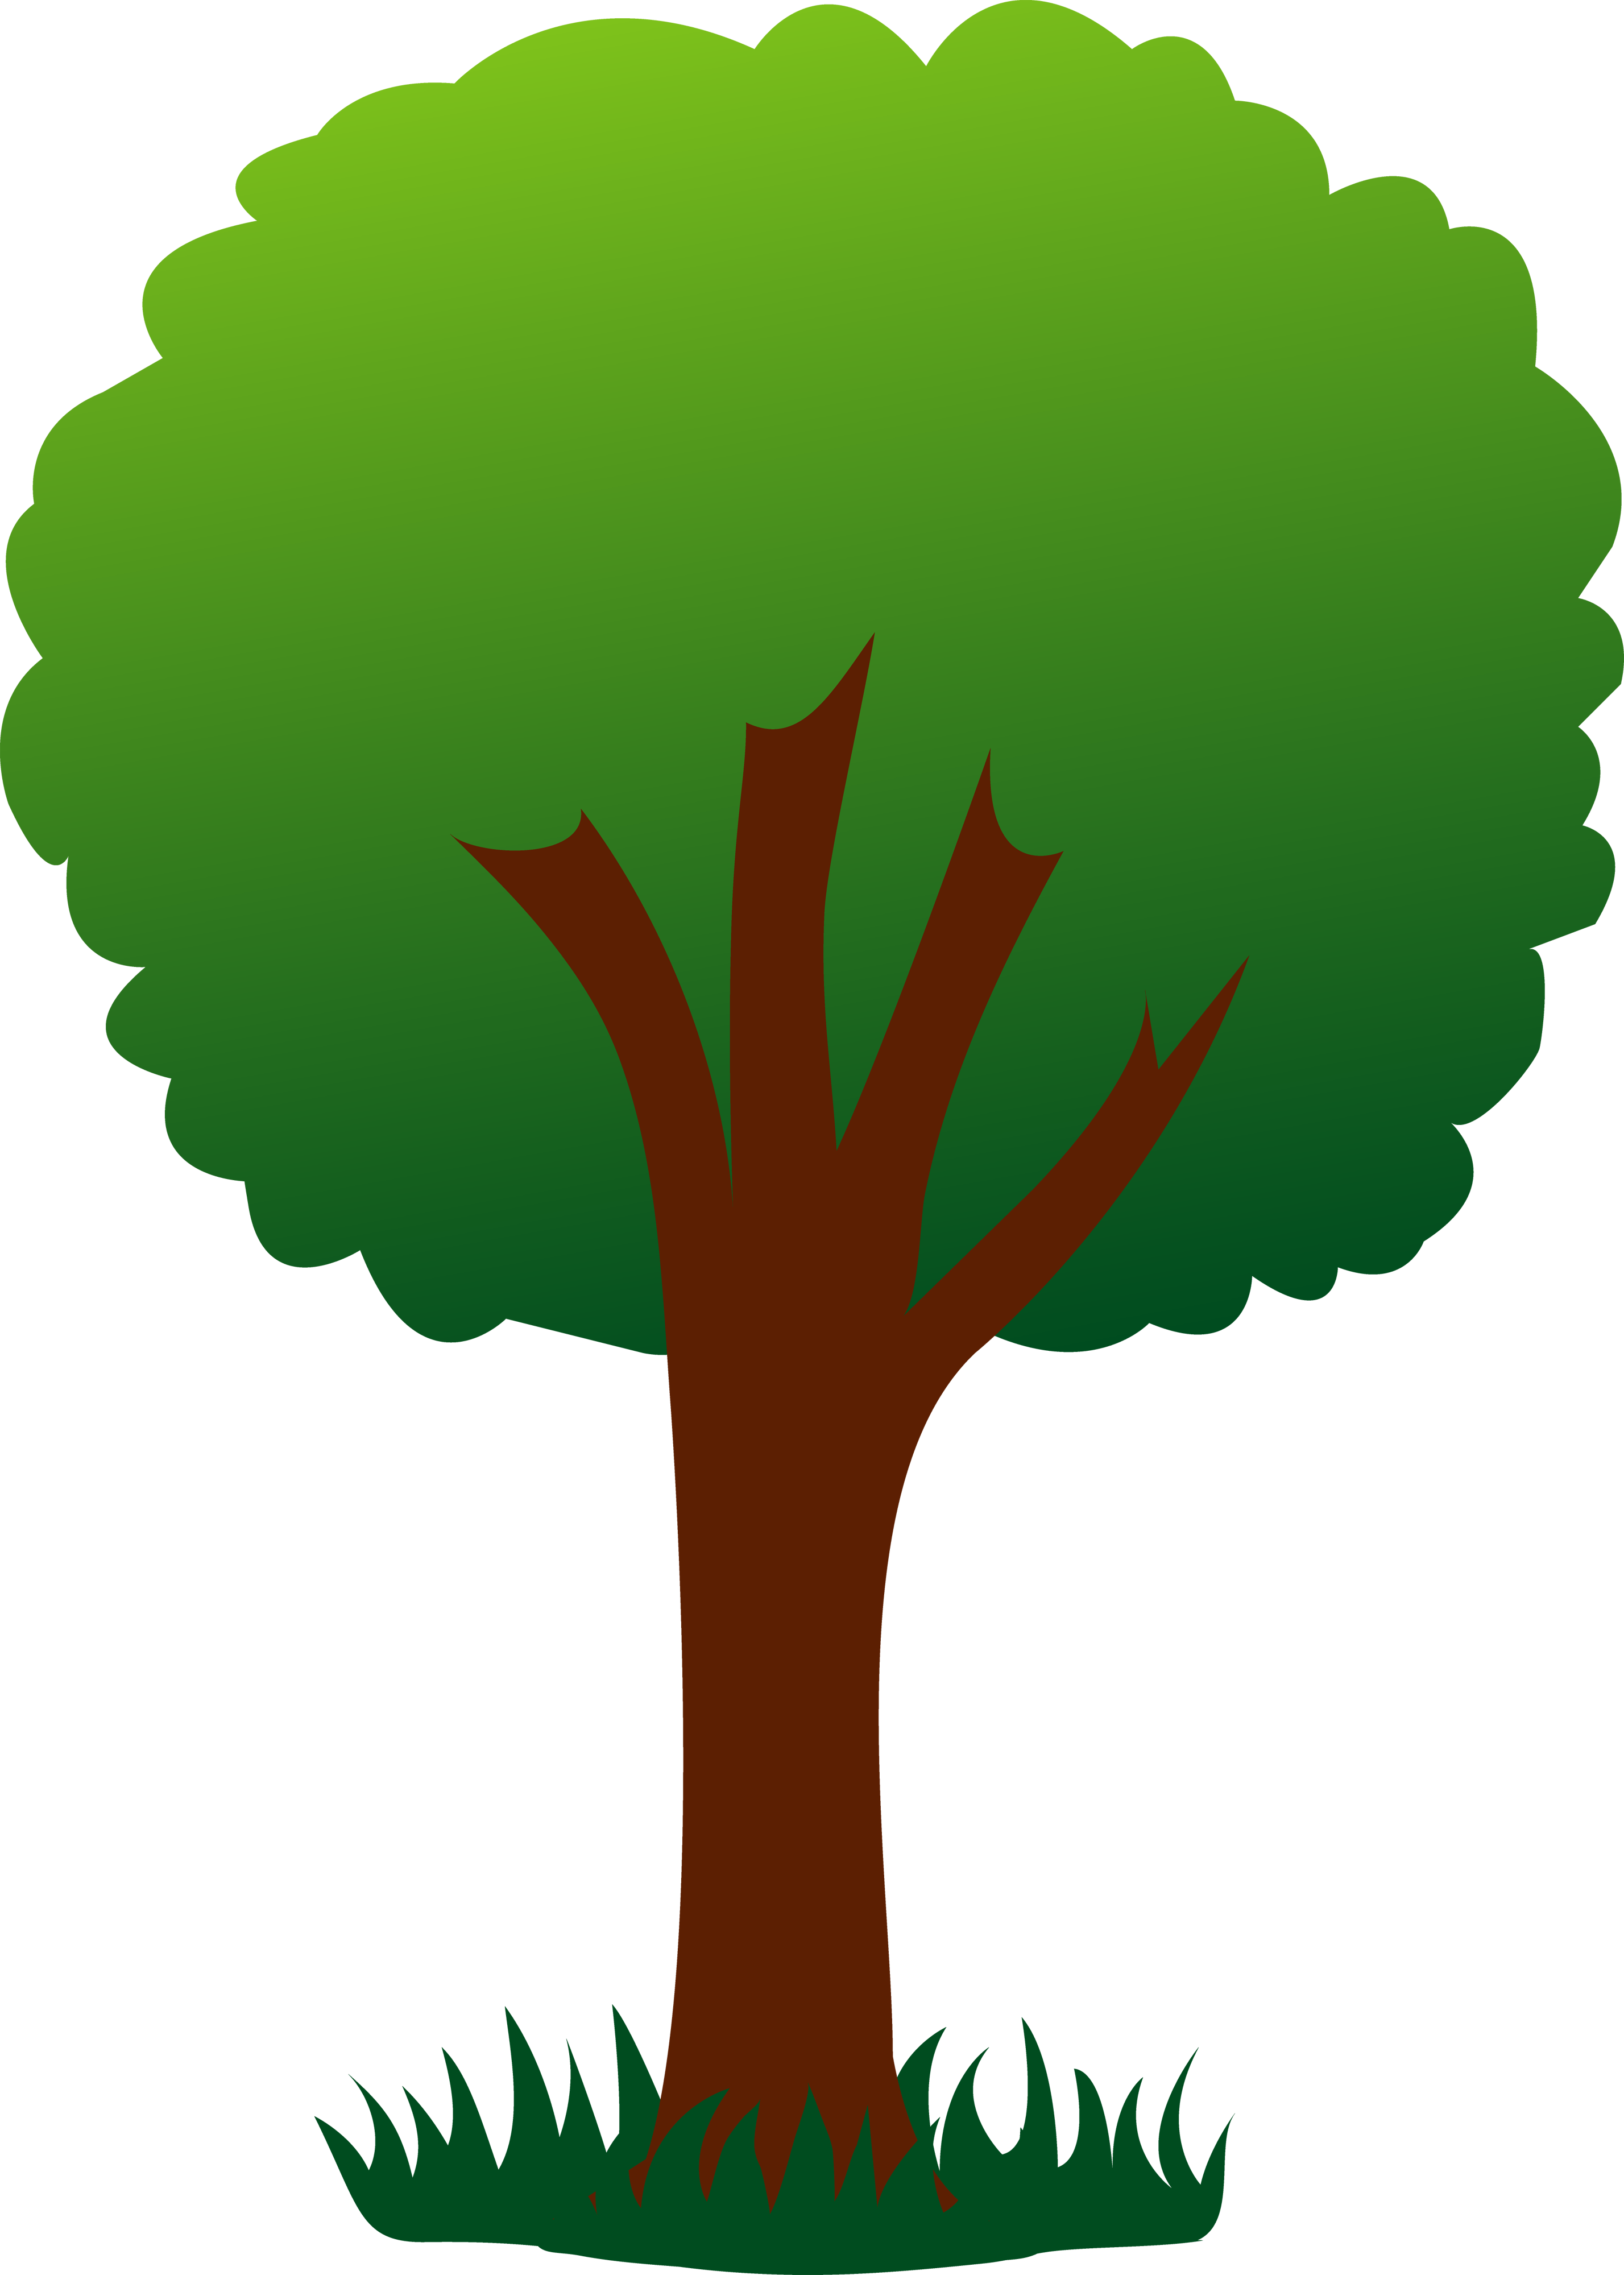 Grass clipart tree. Simple green in free